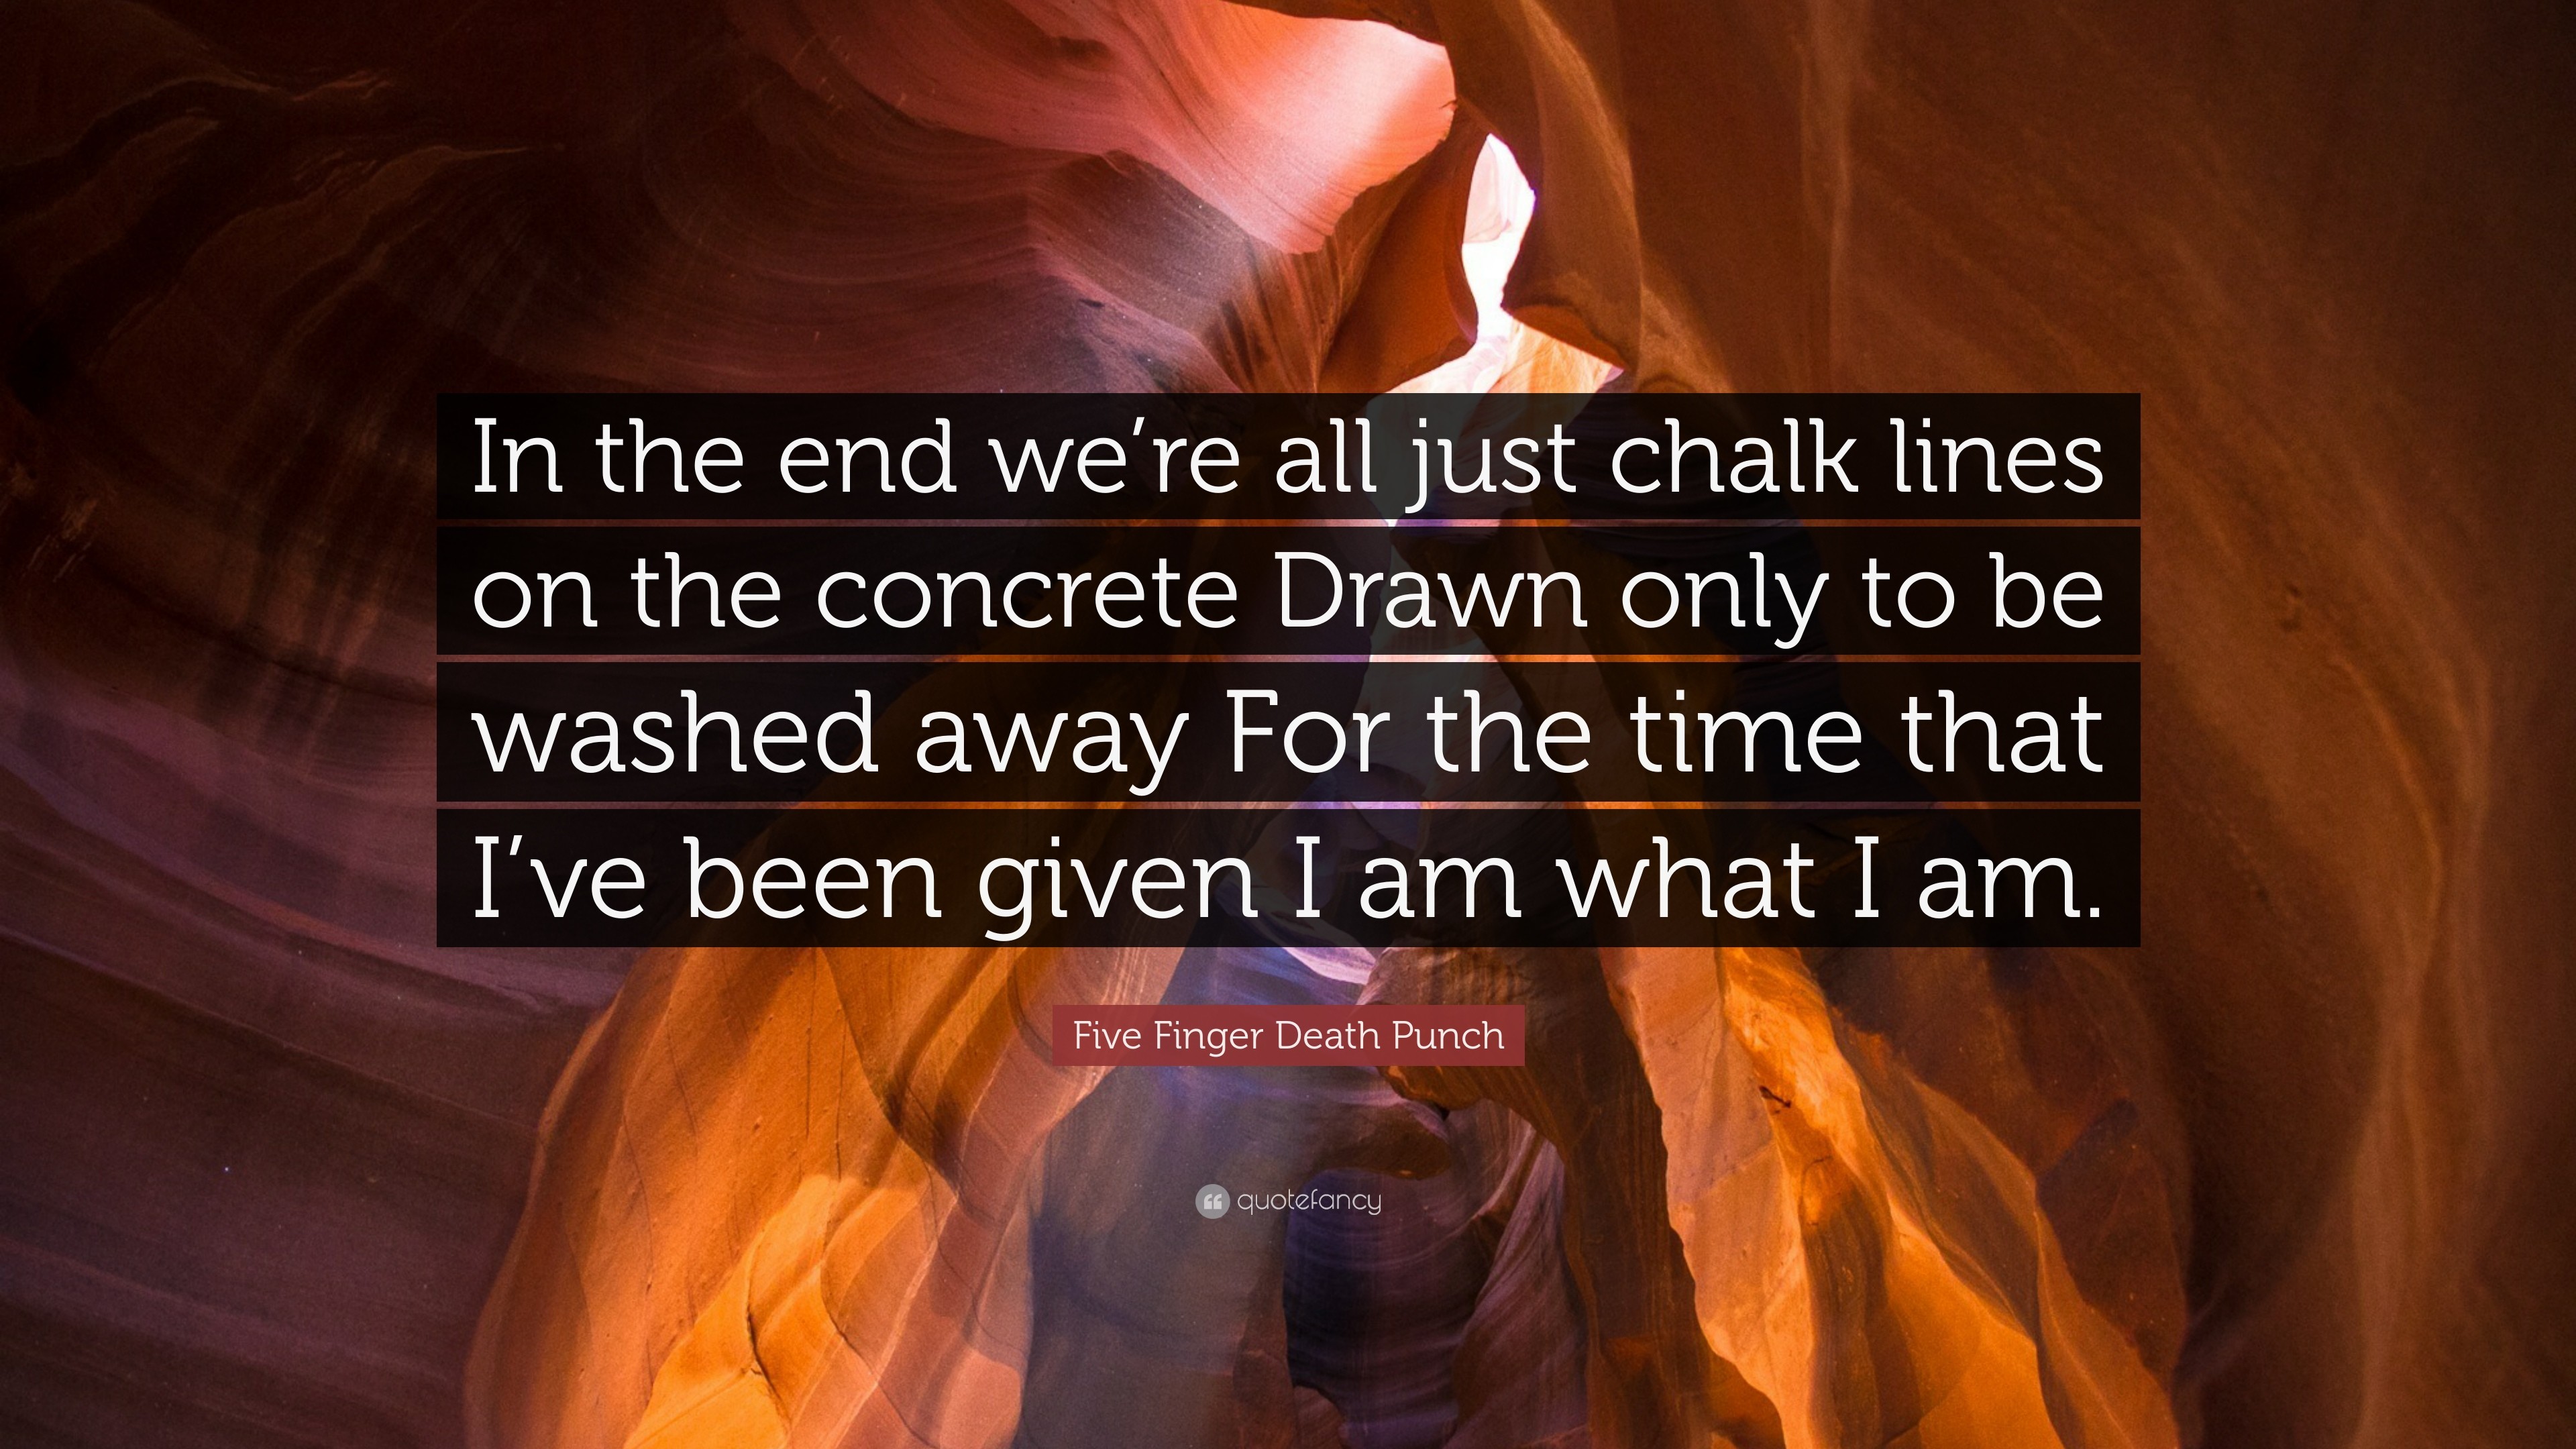 3840x2160 Five Finger Death Punch Quote: “In the end we're all just chalk